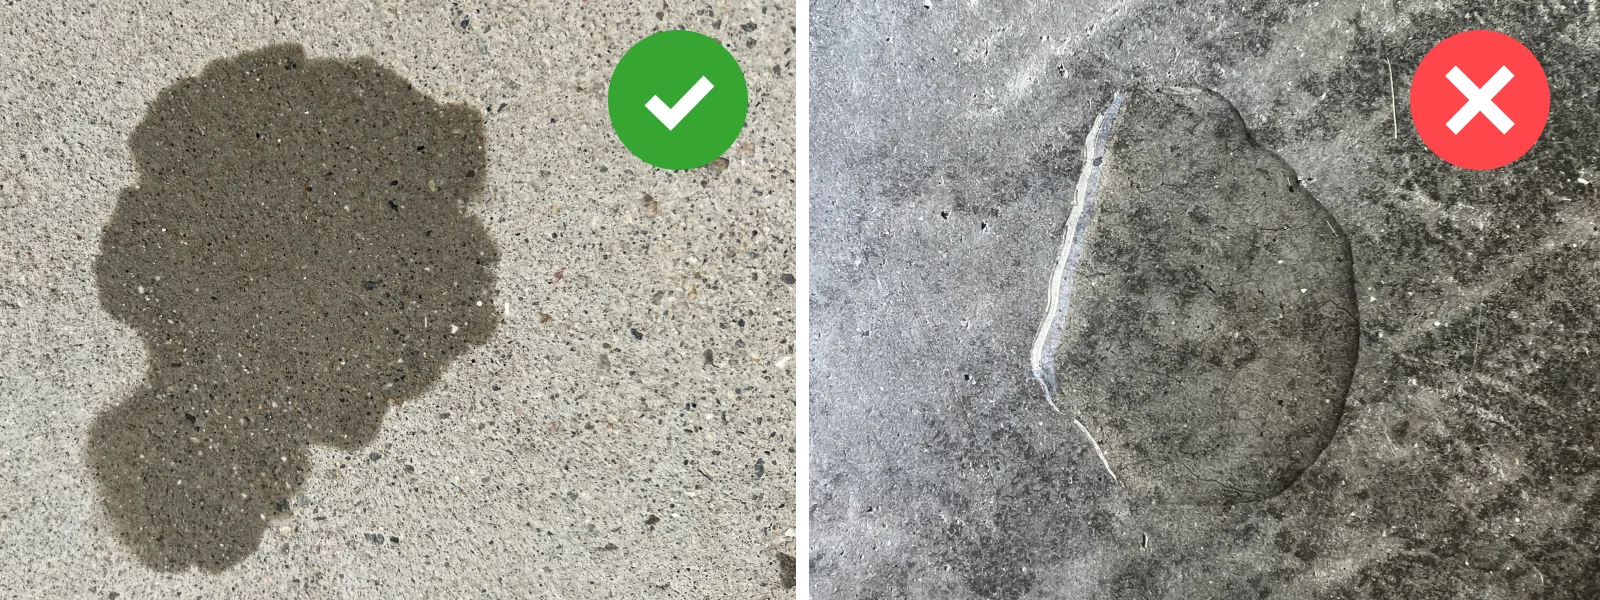 Split photo: left side shows wet concrete that absorbs water, right side shows smooth concrete that repels water